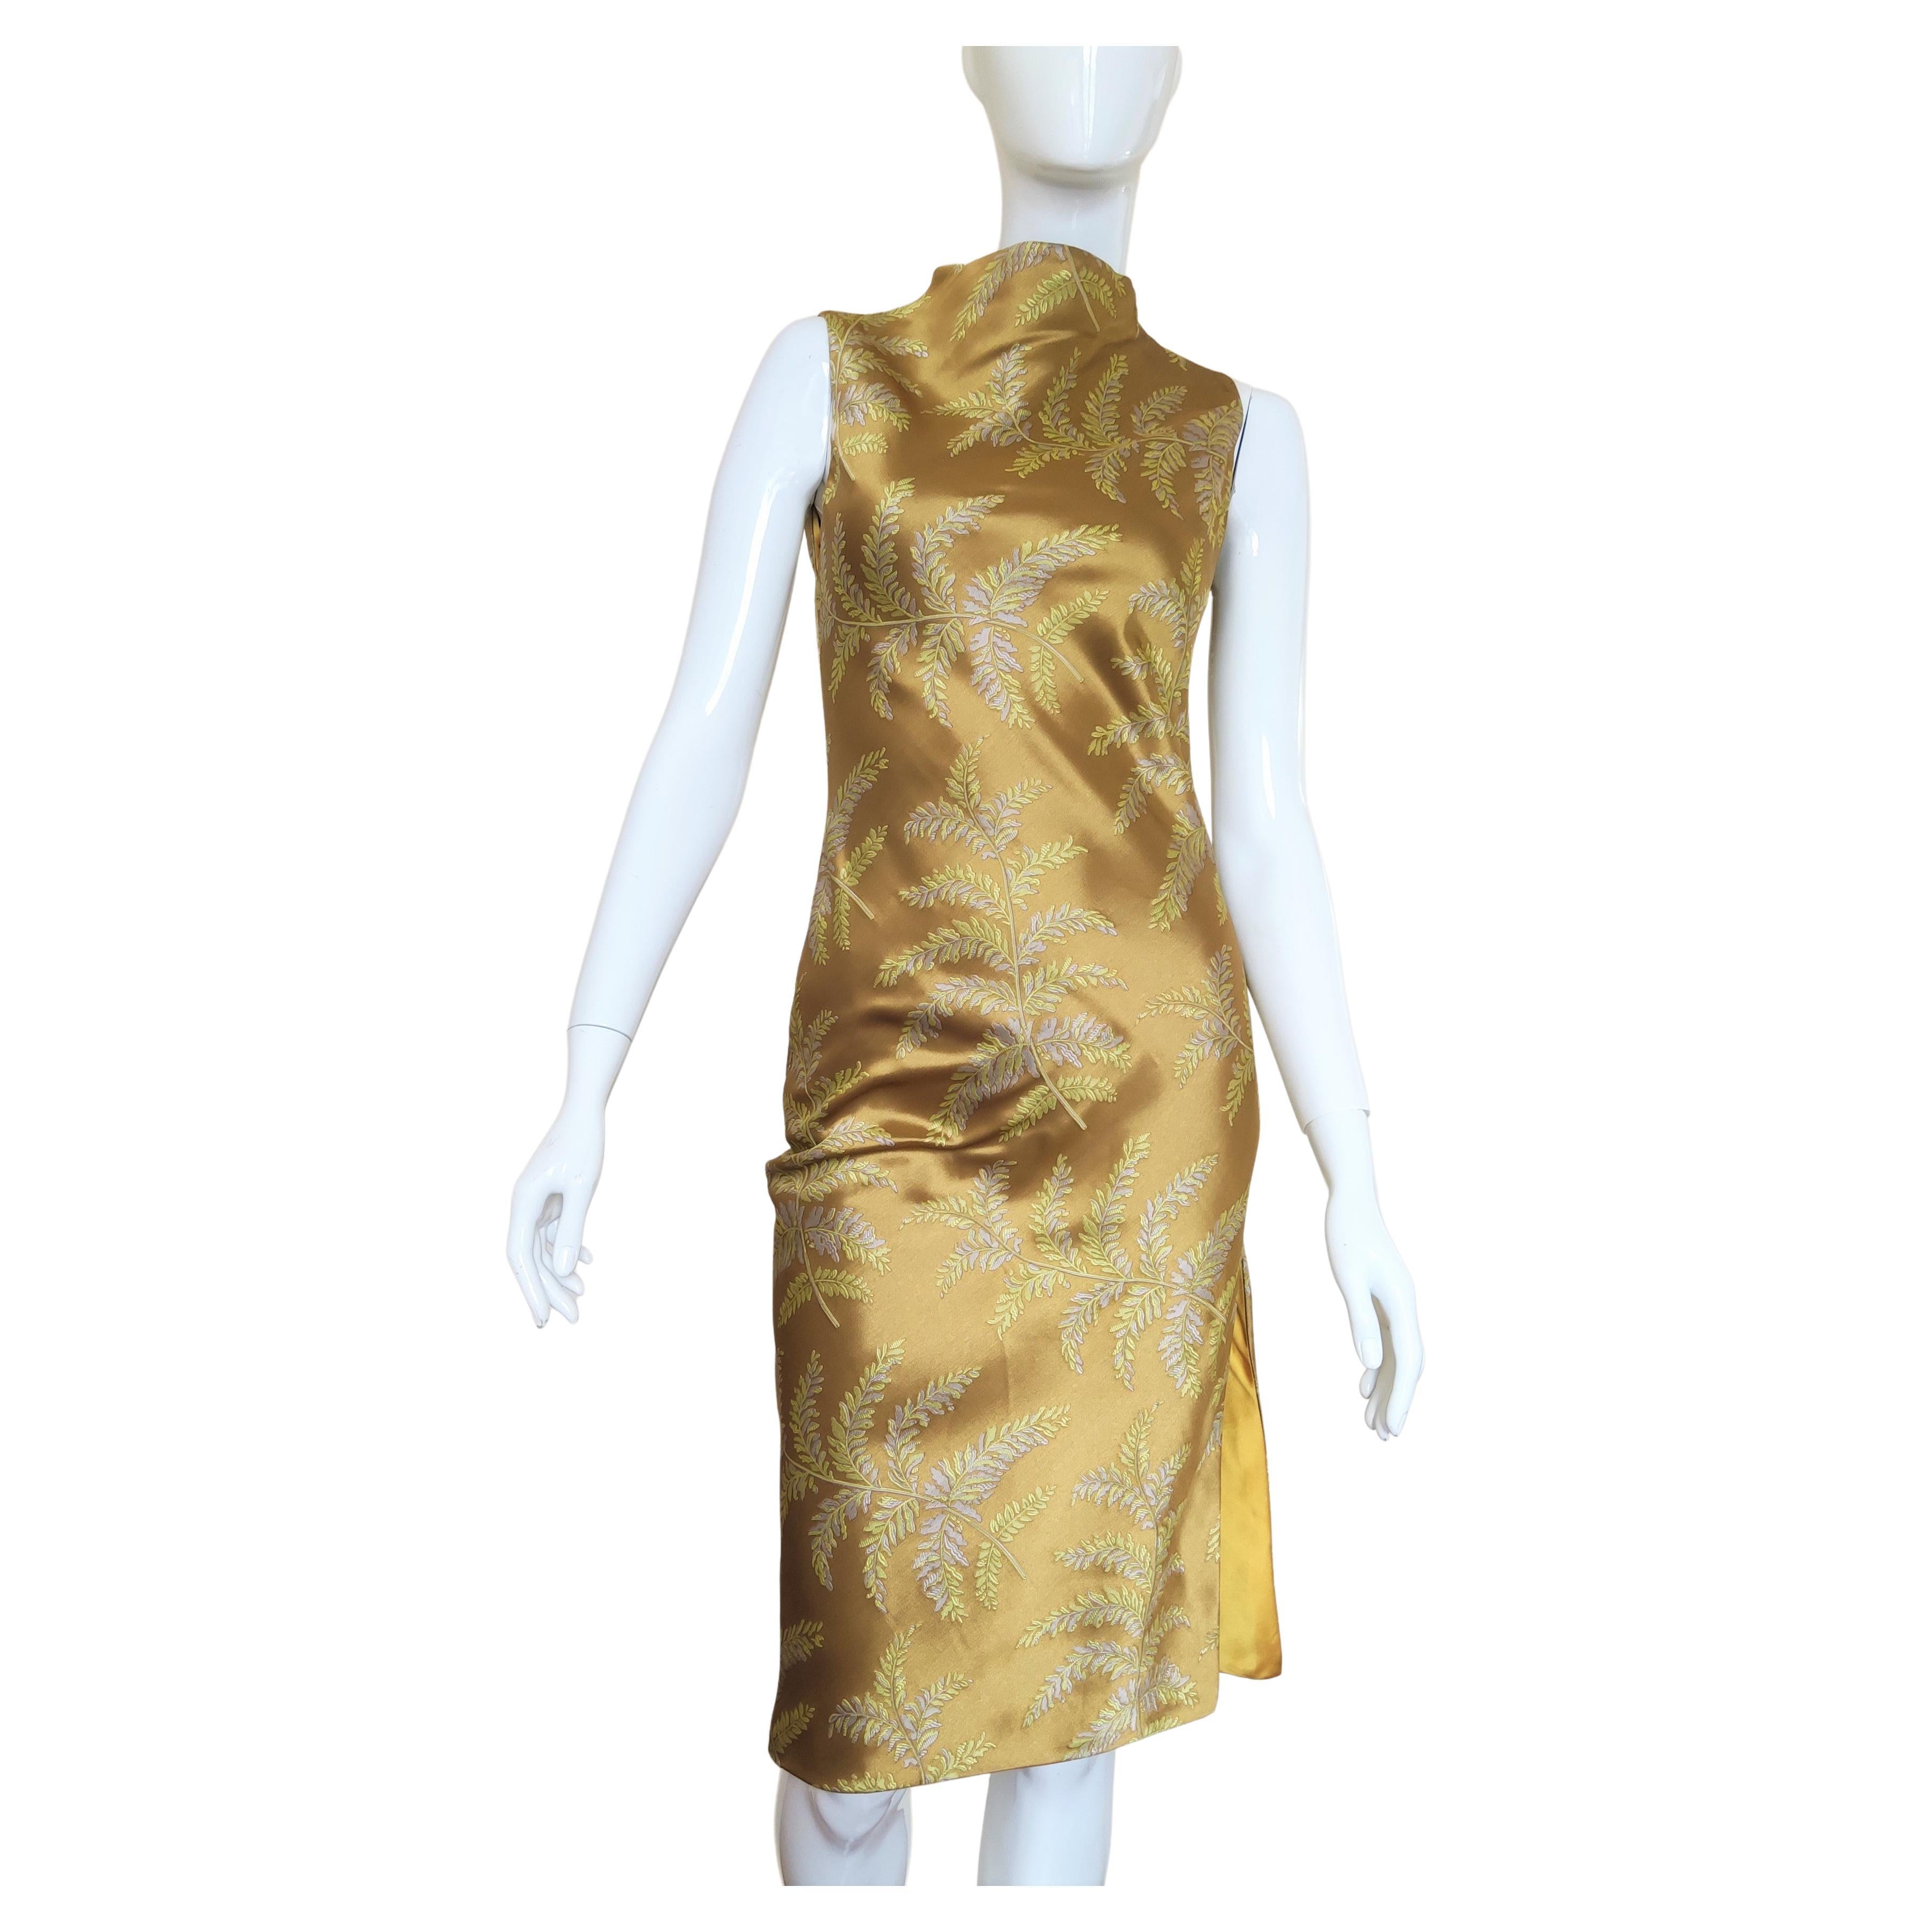 Atelier Gianni Versace Silk Mustard Yellow Floral Leaf Evening Baroque Dress For Sale